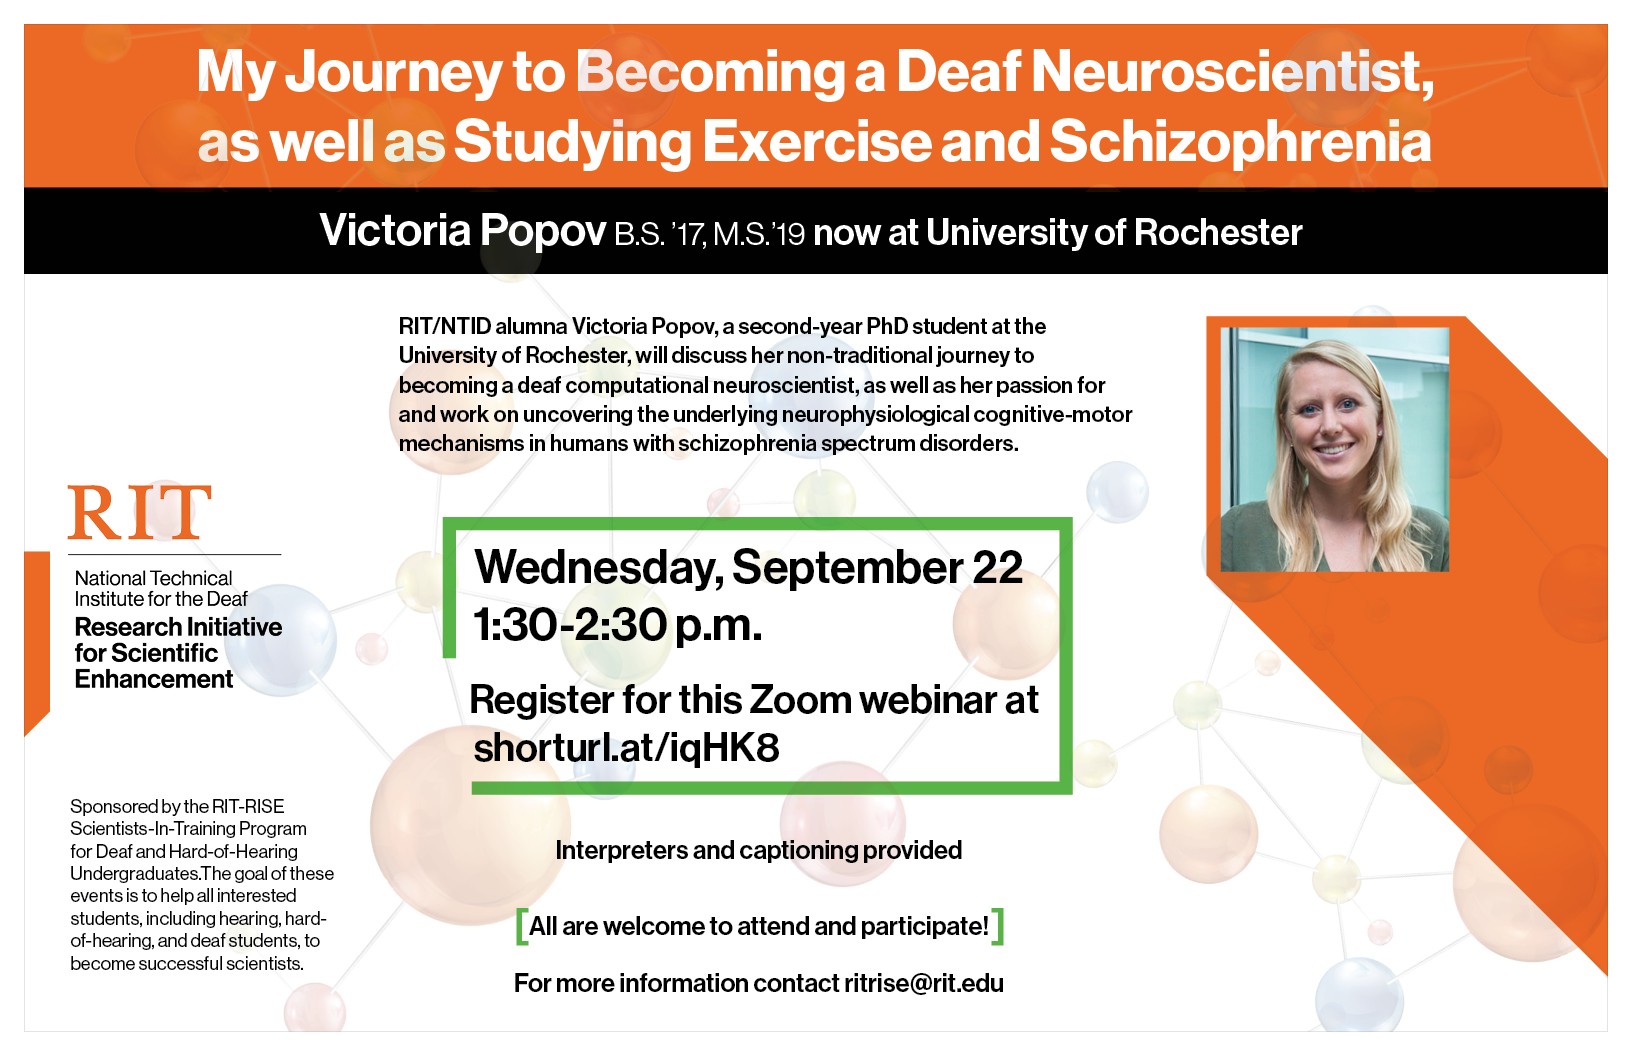 “My Journey to Becoming a Deaf Neuroscientist as well as Studying Exercise and Schizophrenia” presented by Victoria Popov, M.S. [photo of Victoria Popov smiling] RIT/NTID alumna Victoria Popov, a second-year PhD student at the University of Rochester, will discuss her non-traditional journey to becoming a deaf computational neuroscientist, as well as her passion for and work on uncovering the underlying neurophysiological cognitive-motor mechanisms in humans with schizophrenia spectrum disorders. 